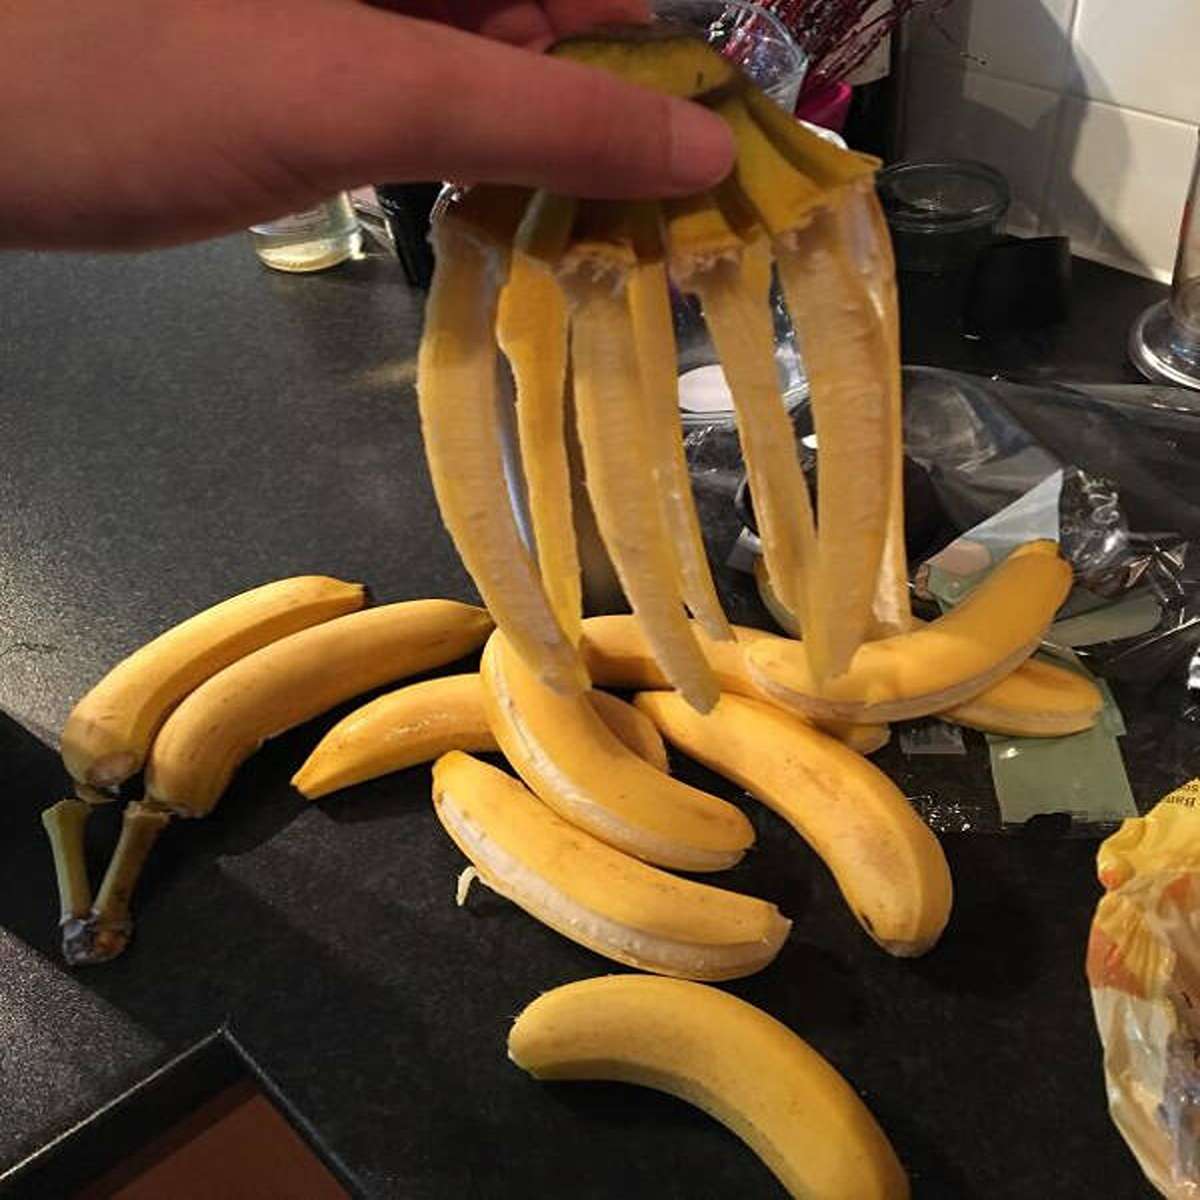 Took the bananas I bought out of the bag and this happened.